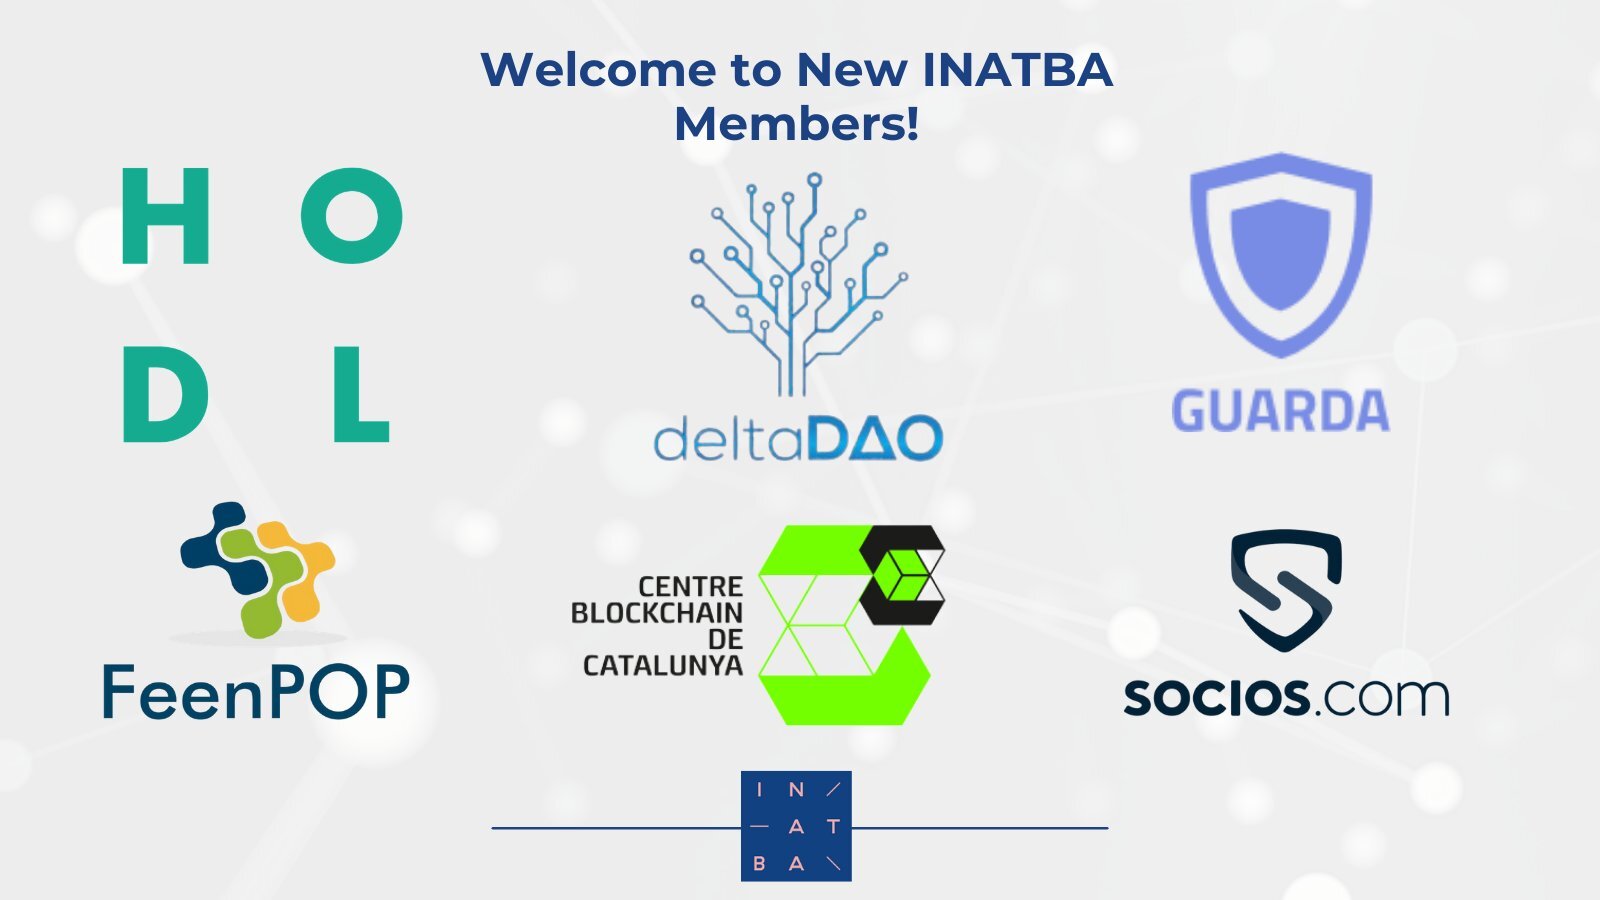 Hodl partners up with INATBA